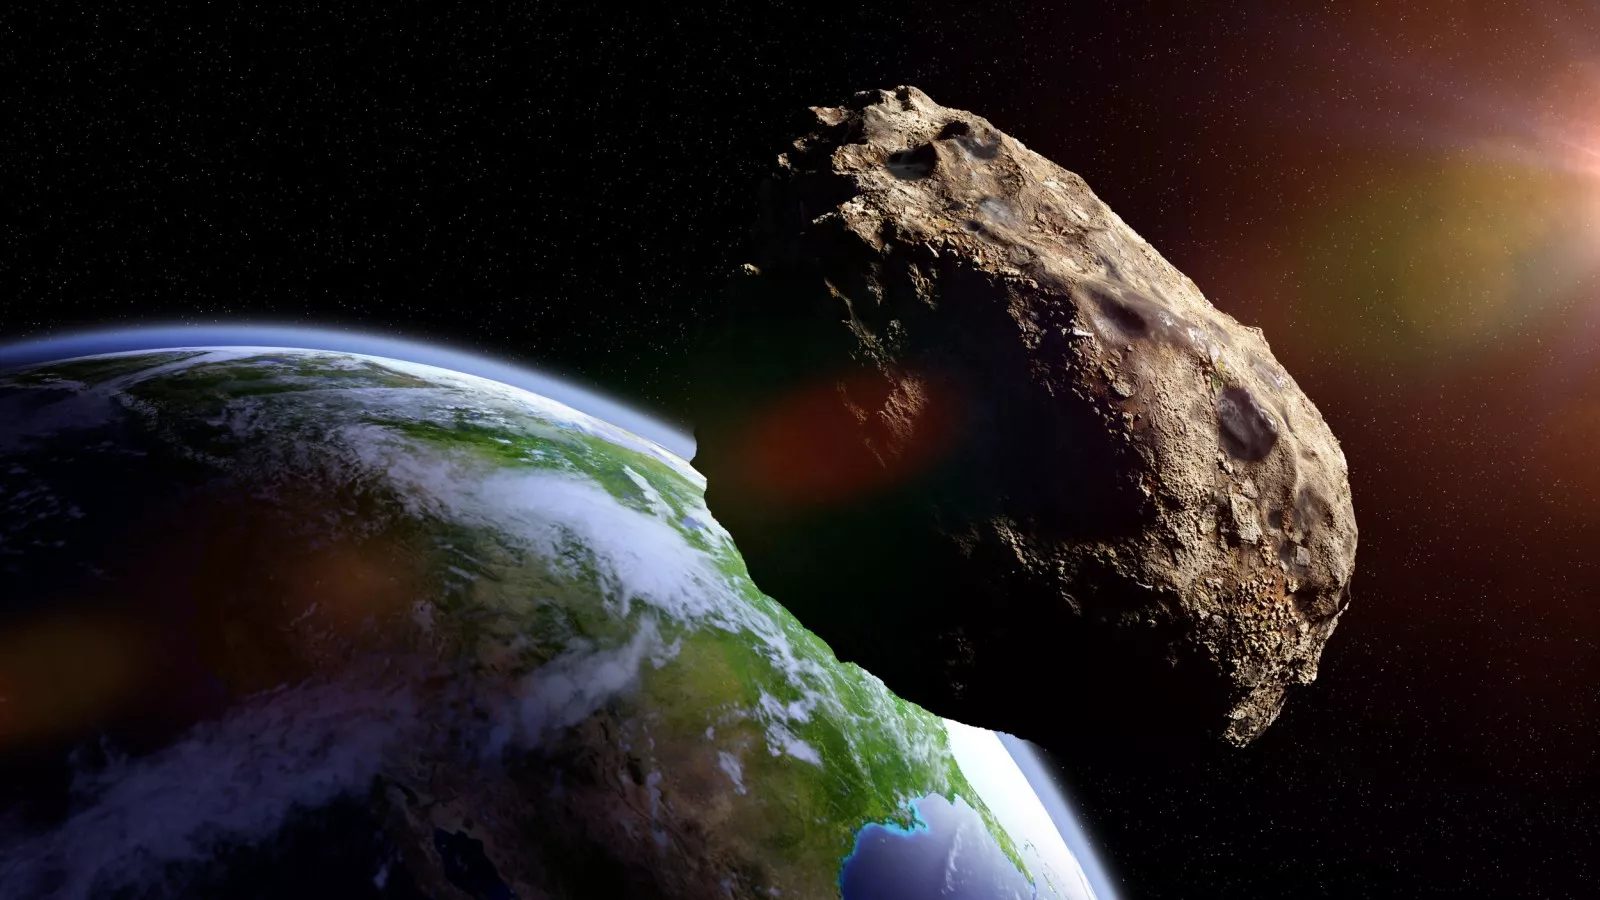 Ancient asteroid sample contains crucial clues about solar system